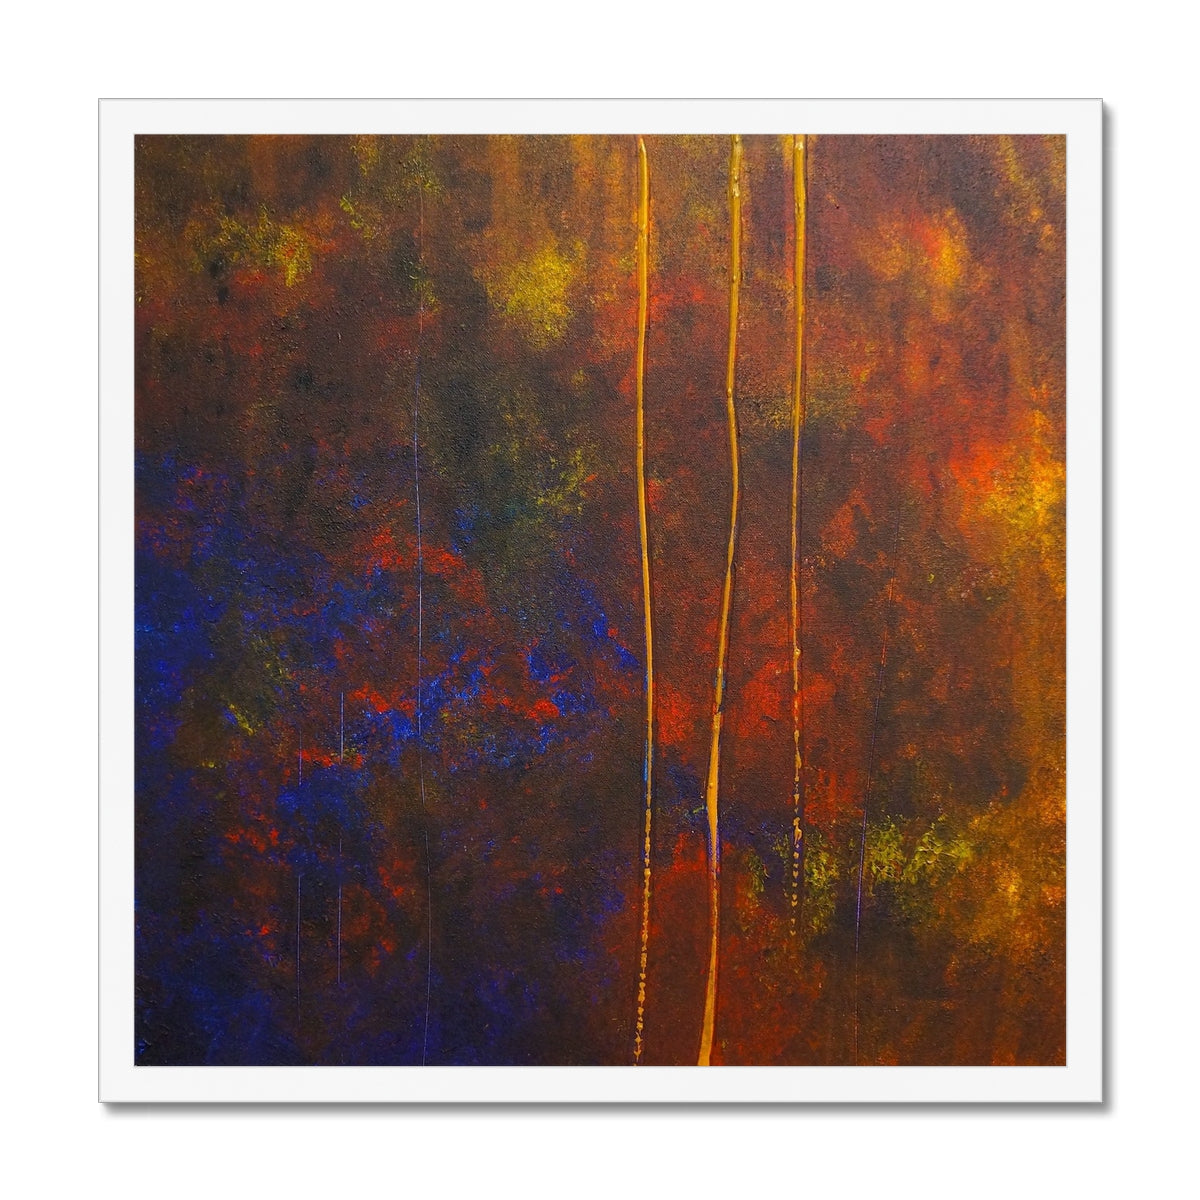 The Autumn Wood Abstract Painting | Framed Prints From Scotland-Framed Prints-Abstract & Impressionistic Art Gallery-20"x20"-White Frame-Paintings, Prints, Homeware, Art Gifts From Scotland By Scottish Artist Kevin Hunter